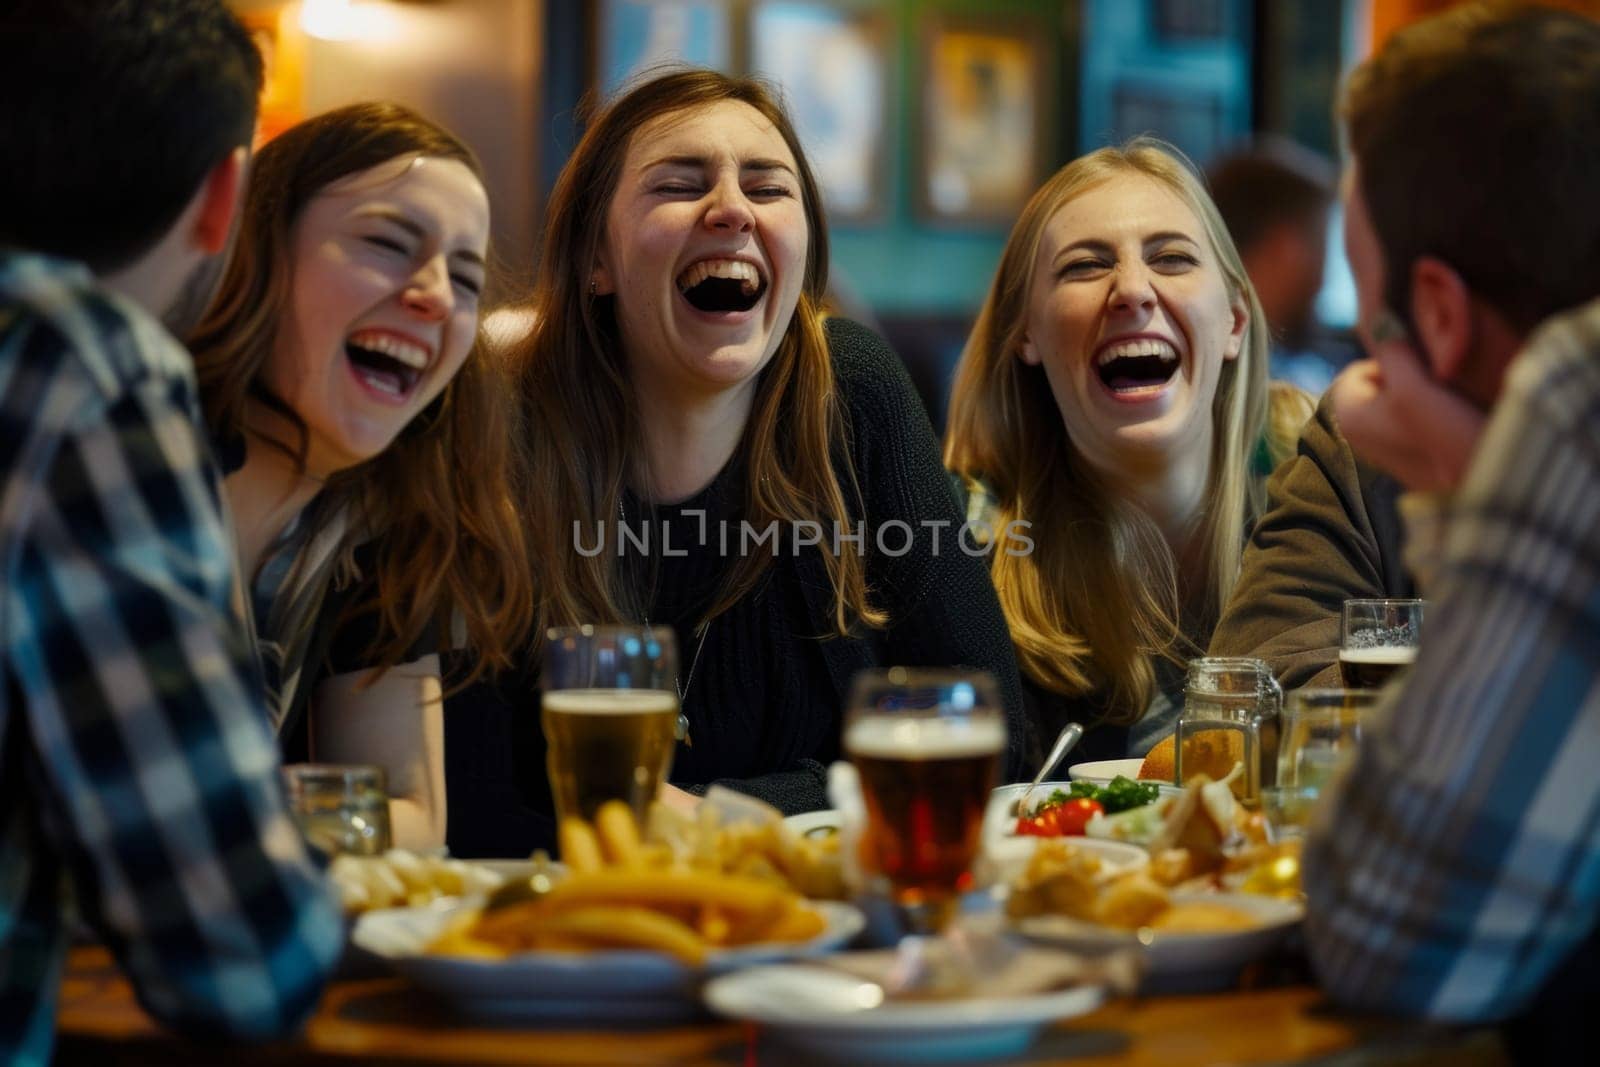 Female friends laughing while enjoying food and drinks with friends.